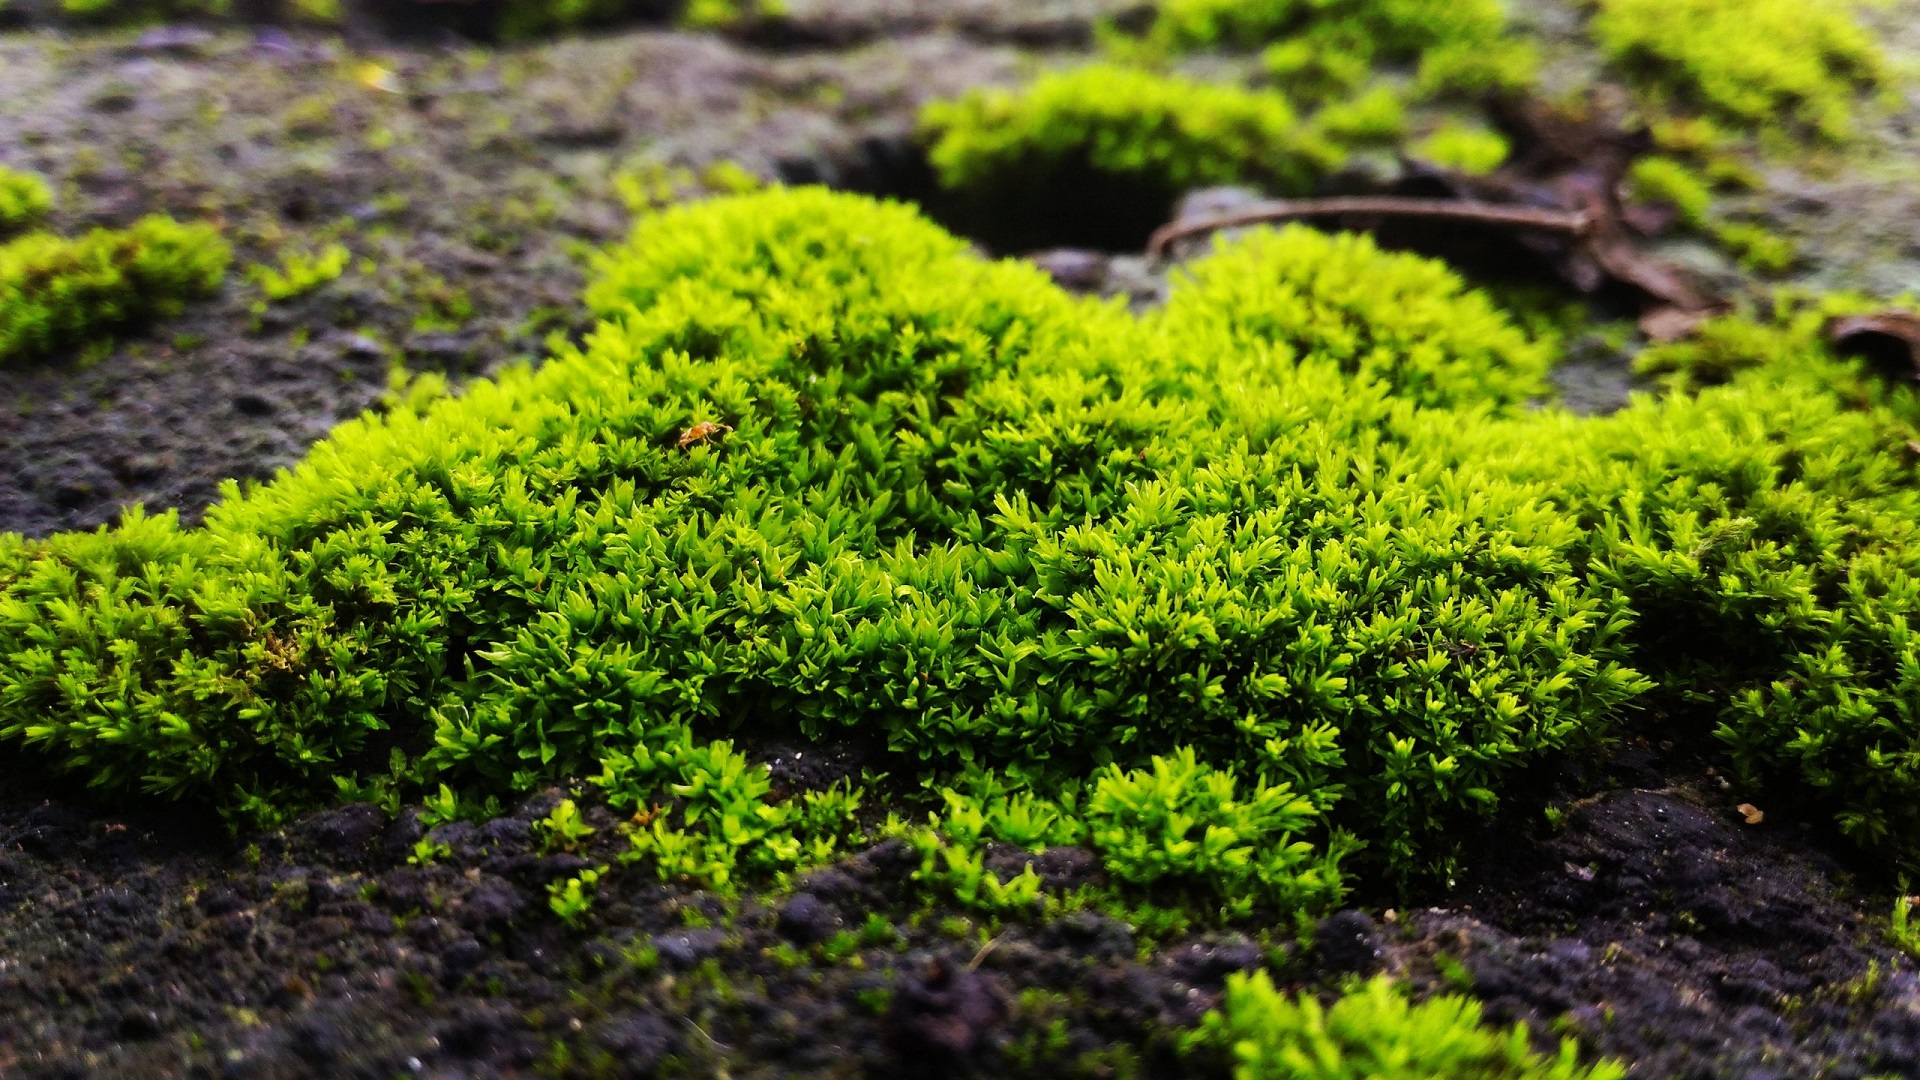 Peat Moss vs Sphagnum Moss: What's The Difference?